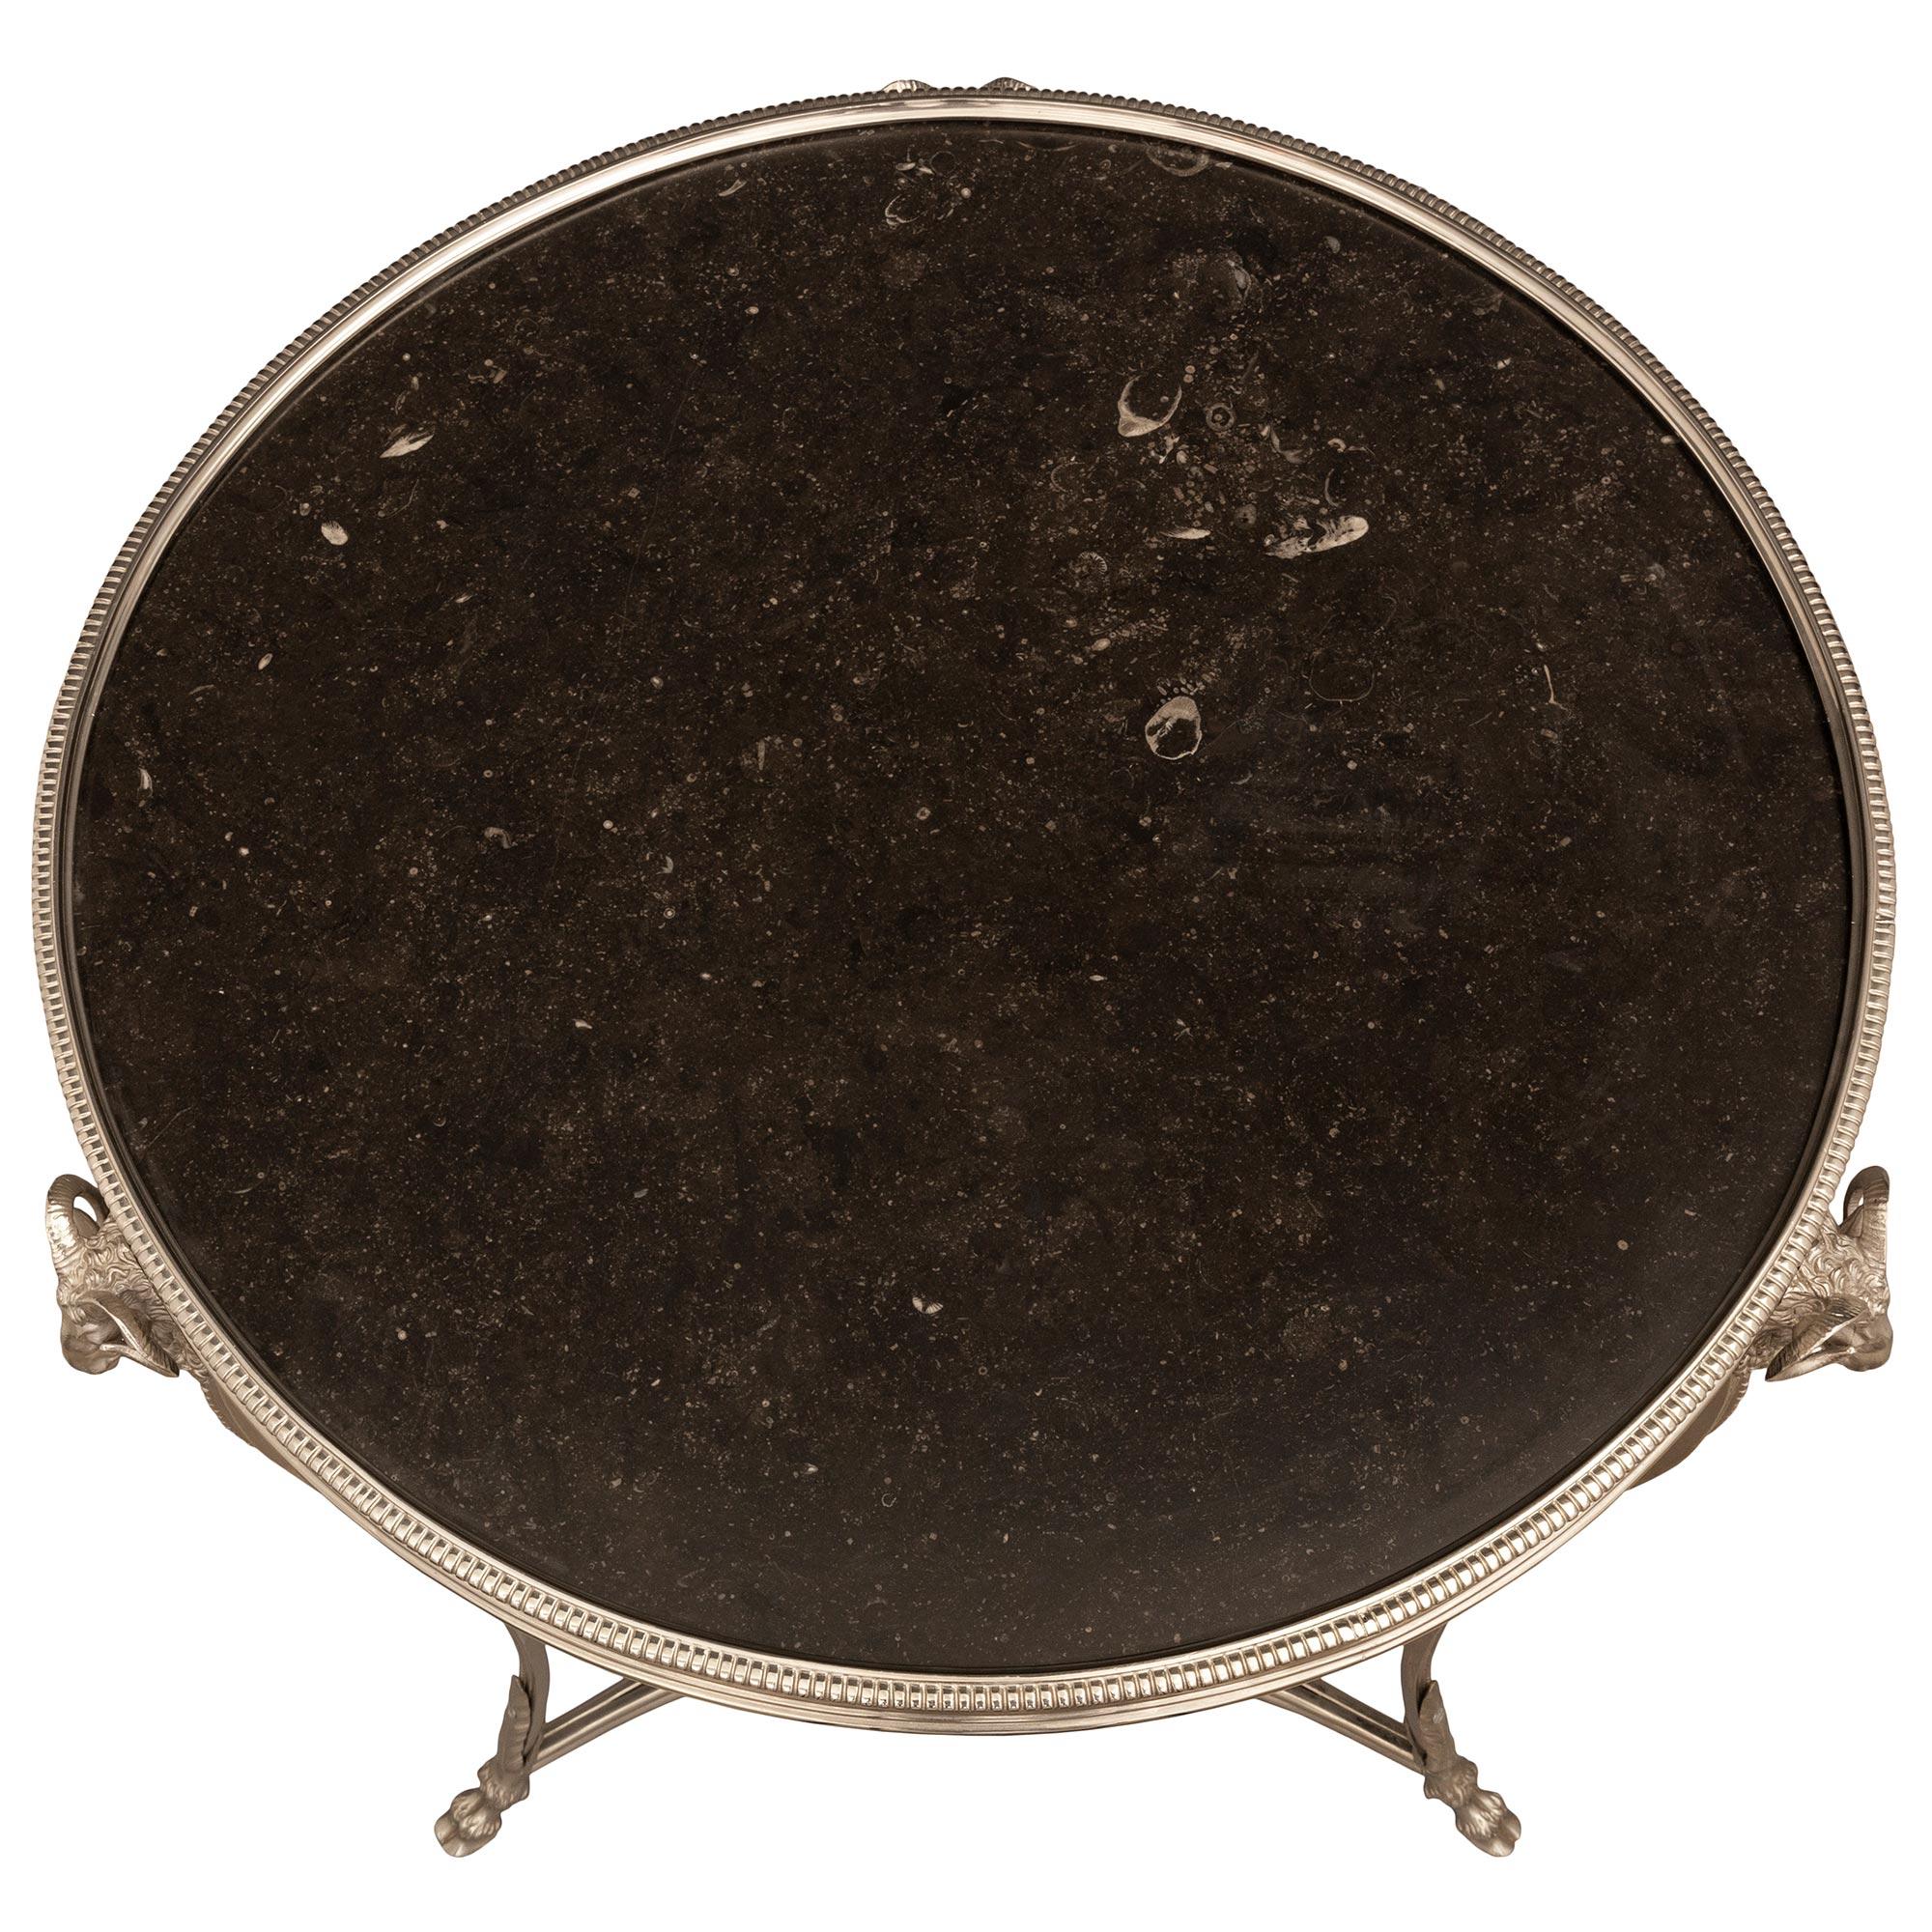 A most elegant and high quality French 19th century Louis XVI st. silvered bronze and black Belgian marble Guéridon side table. The table is raised by handsome finely detailed hoof feet with large acanthus leaves and three beautifully scrolled